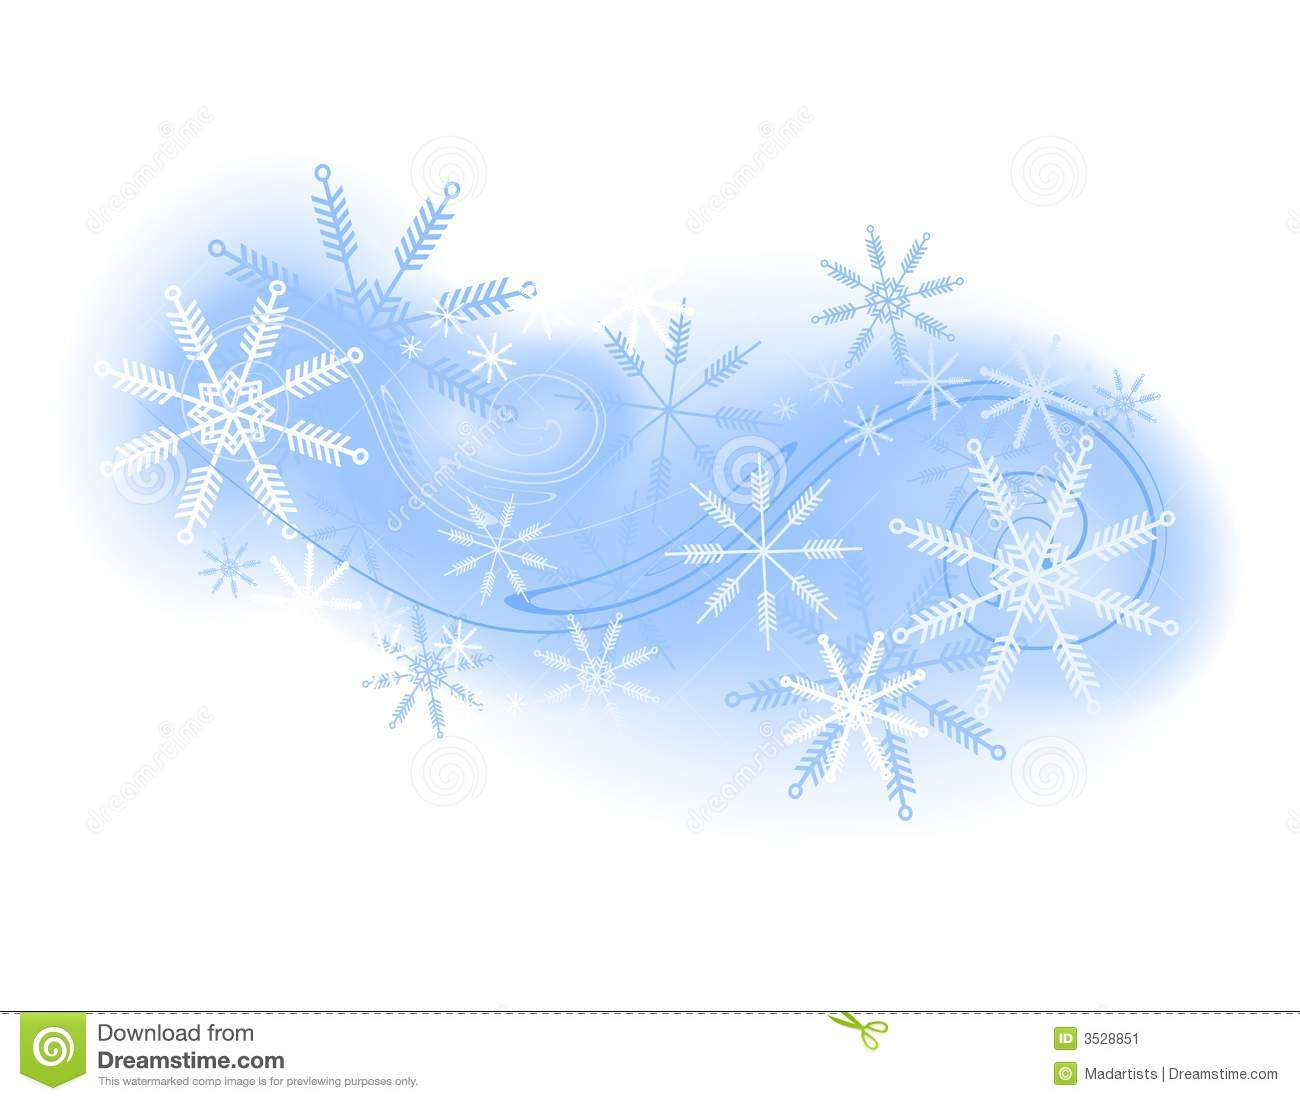 Clip Art Illustration Featuring Soft Wispy Lines Representing Winter